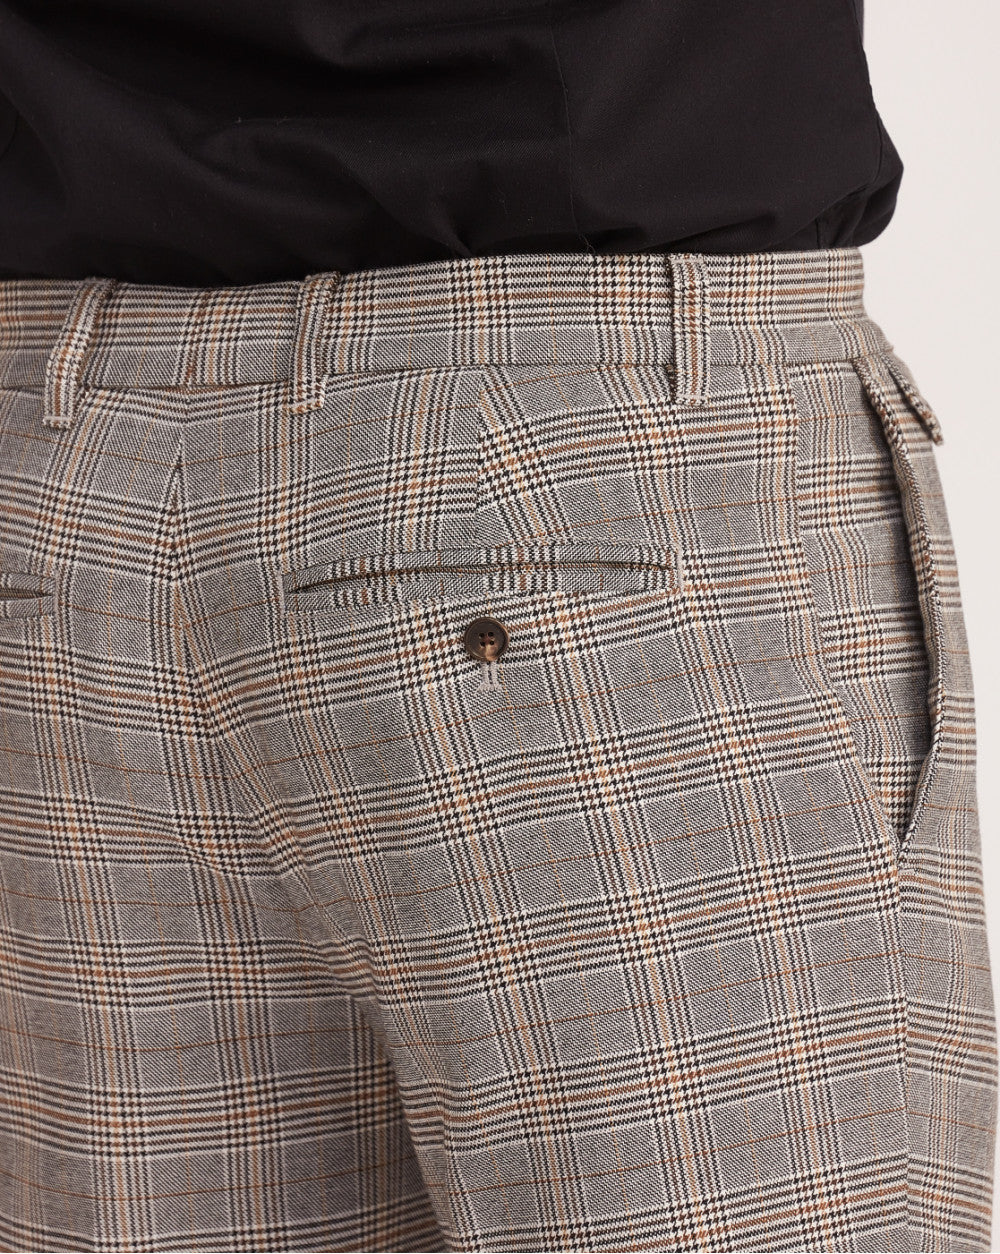 Tapered Fit Pleated Plaid Chinos - Winter Sun Checks